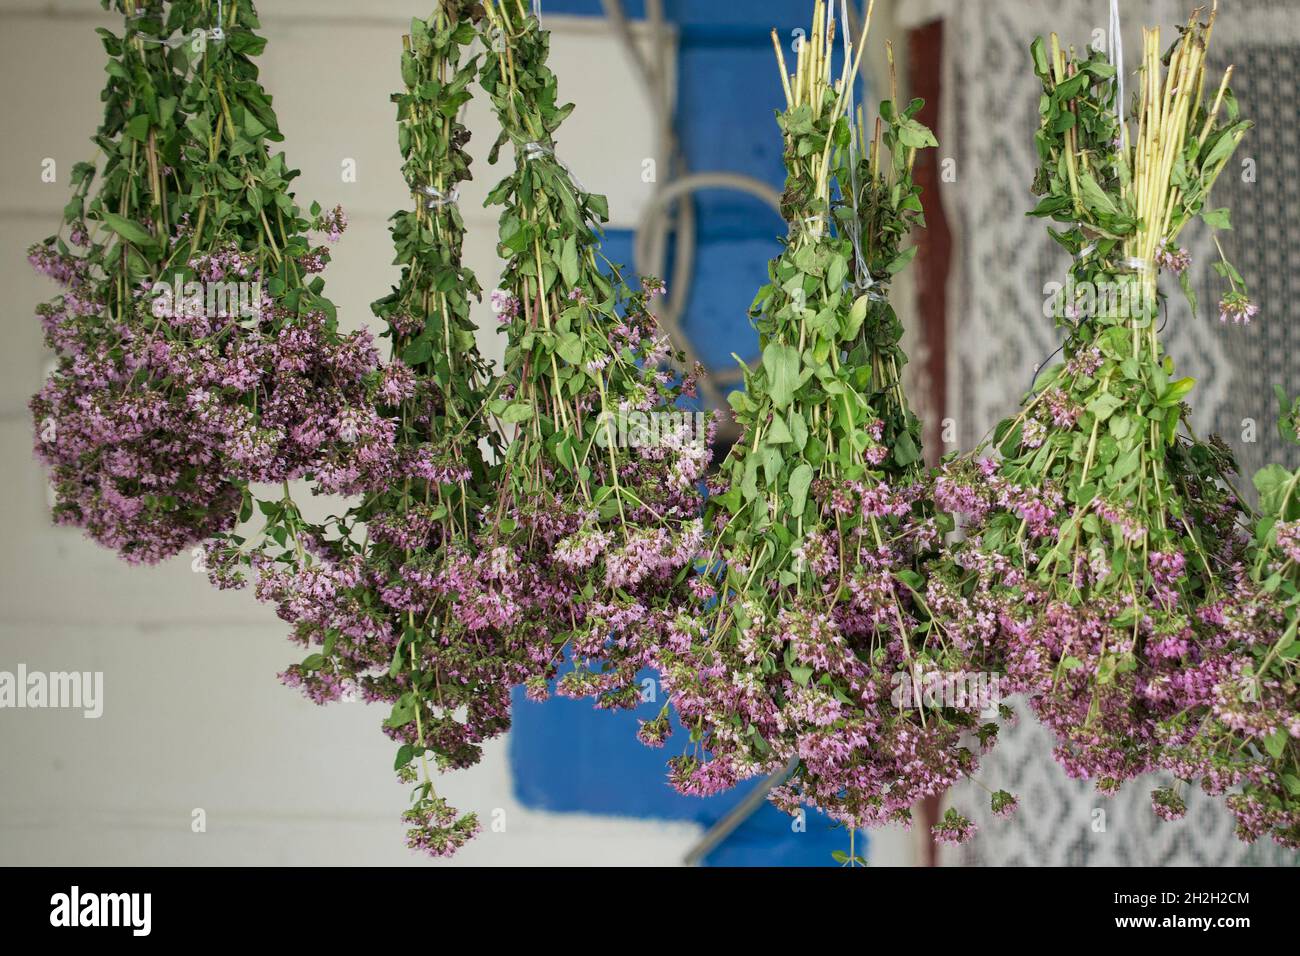 Bunches of oregano herbs. A healing plant with purple flowers. Stock Photo